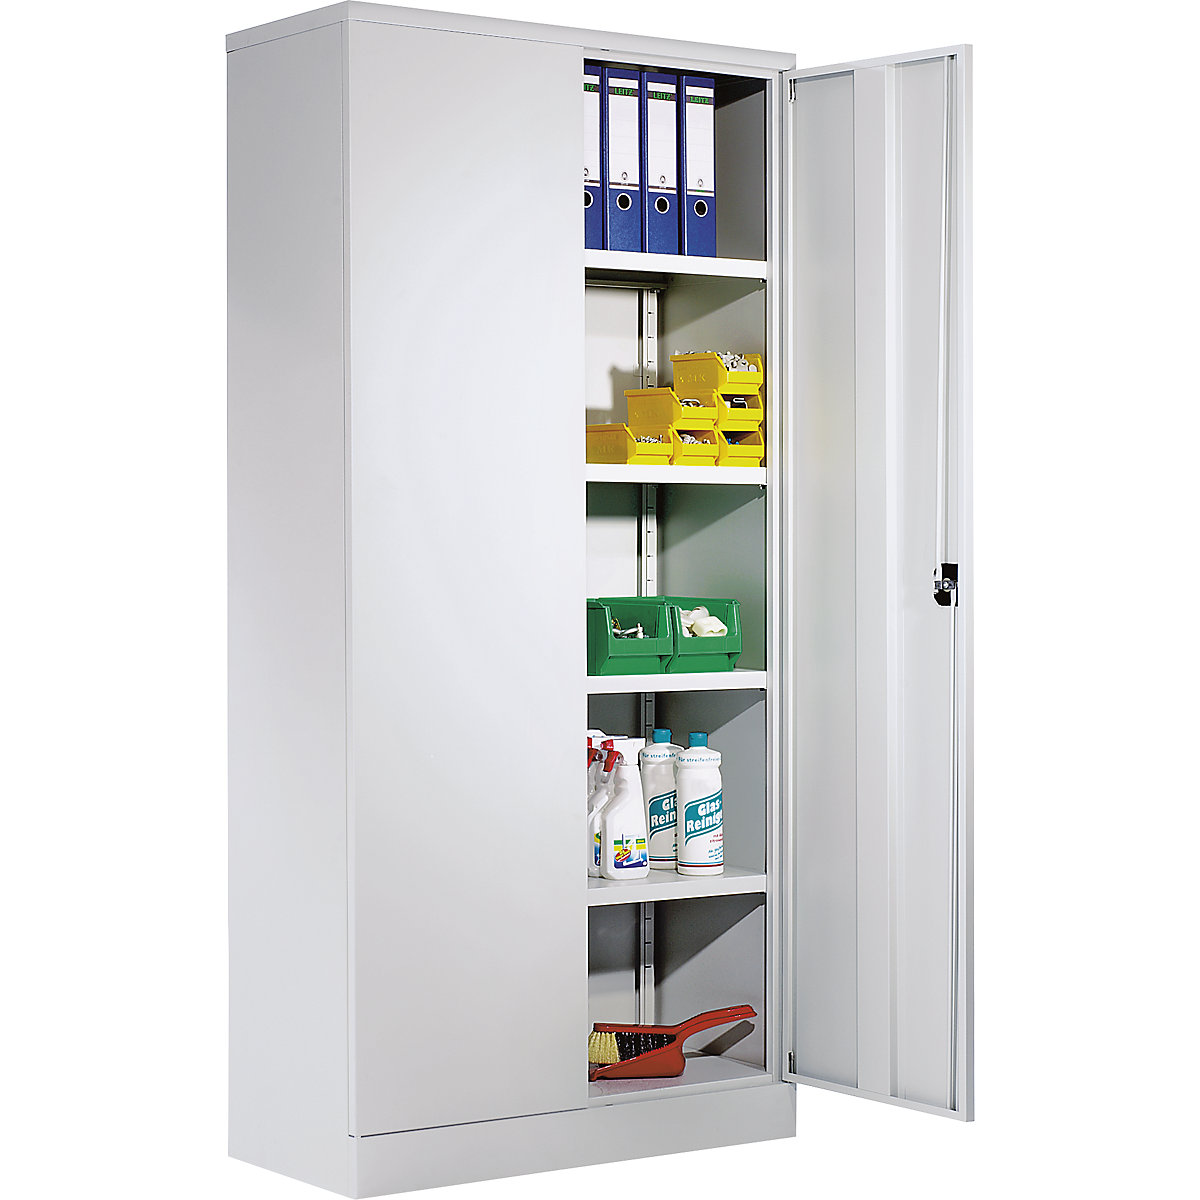 Universal cupboard with hinged doors and 4 shelves – eurokraft basic, HxWxD 1950 x 915 x 421 mm, body and doors light grey, 3+ items-16